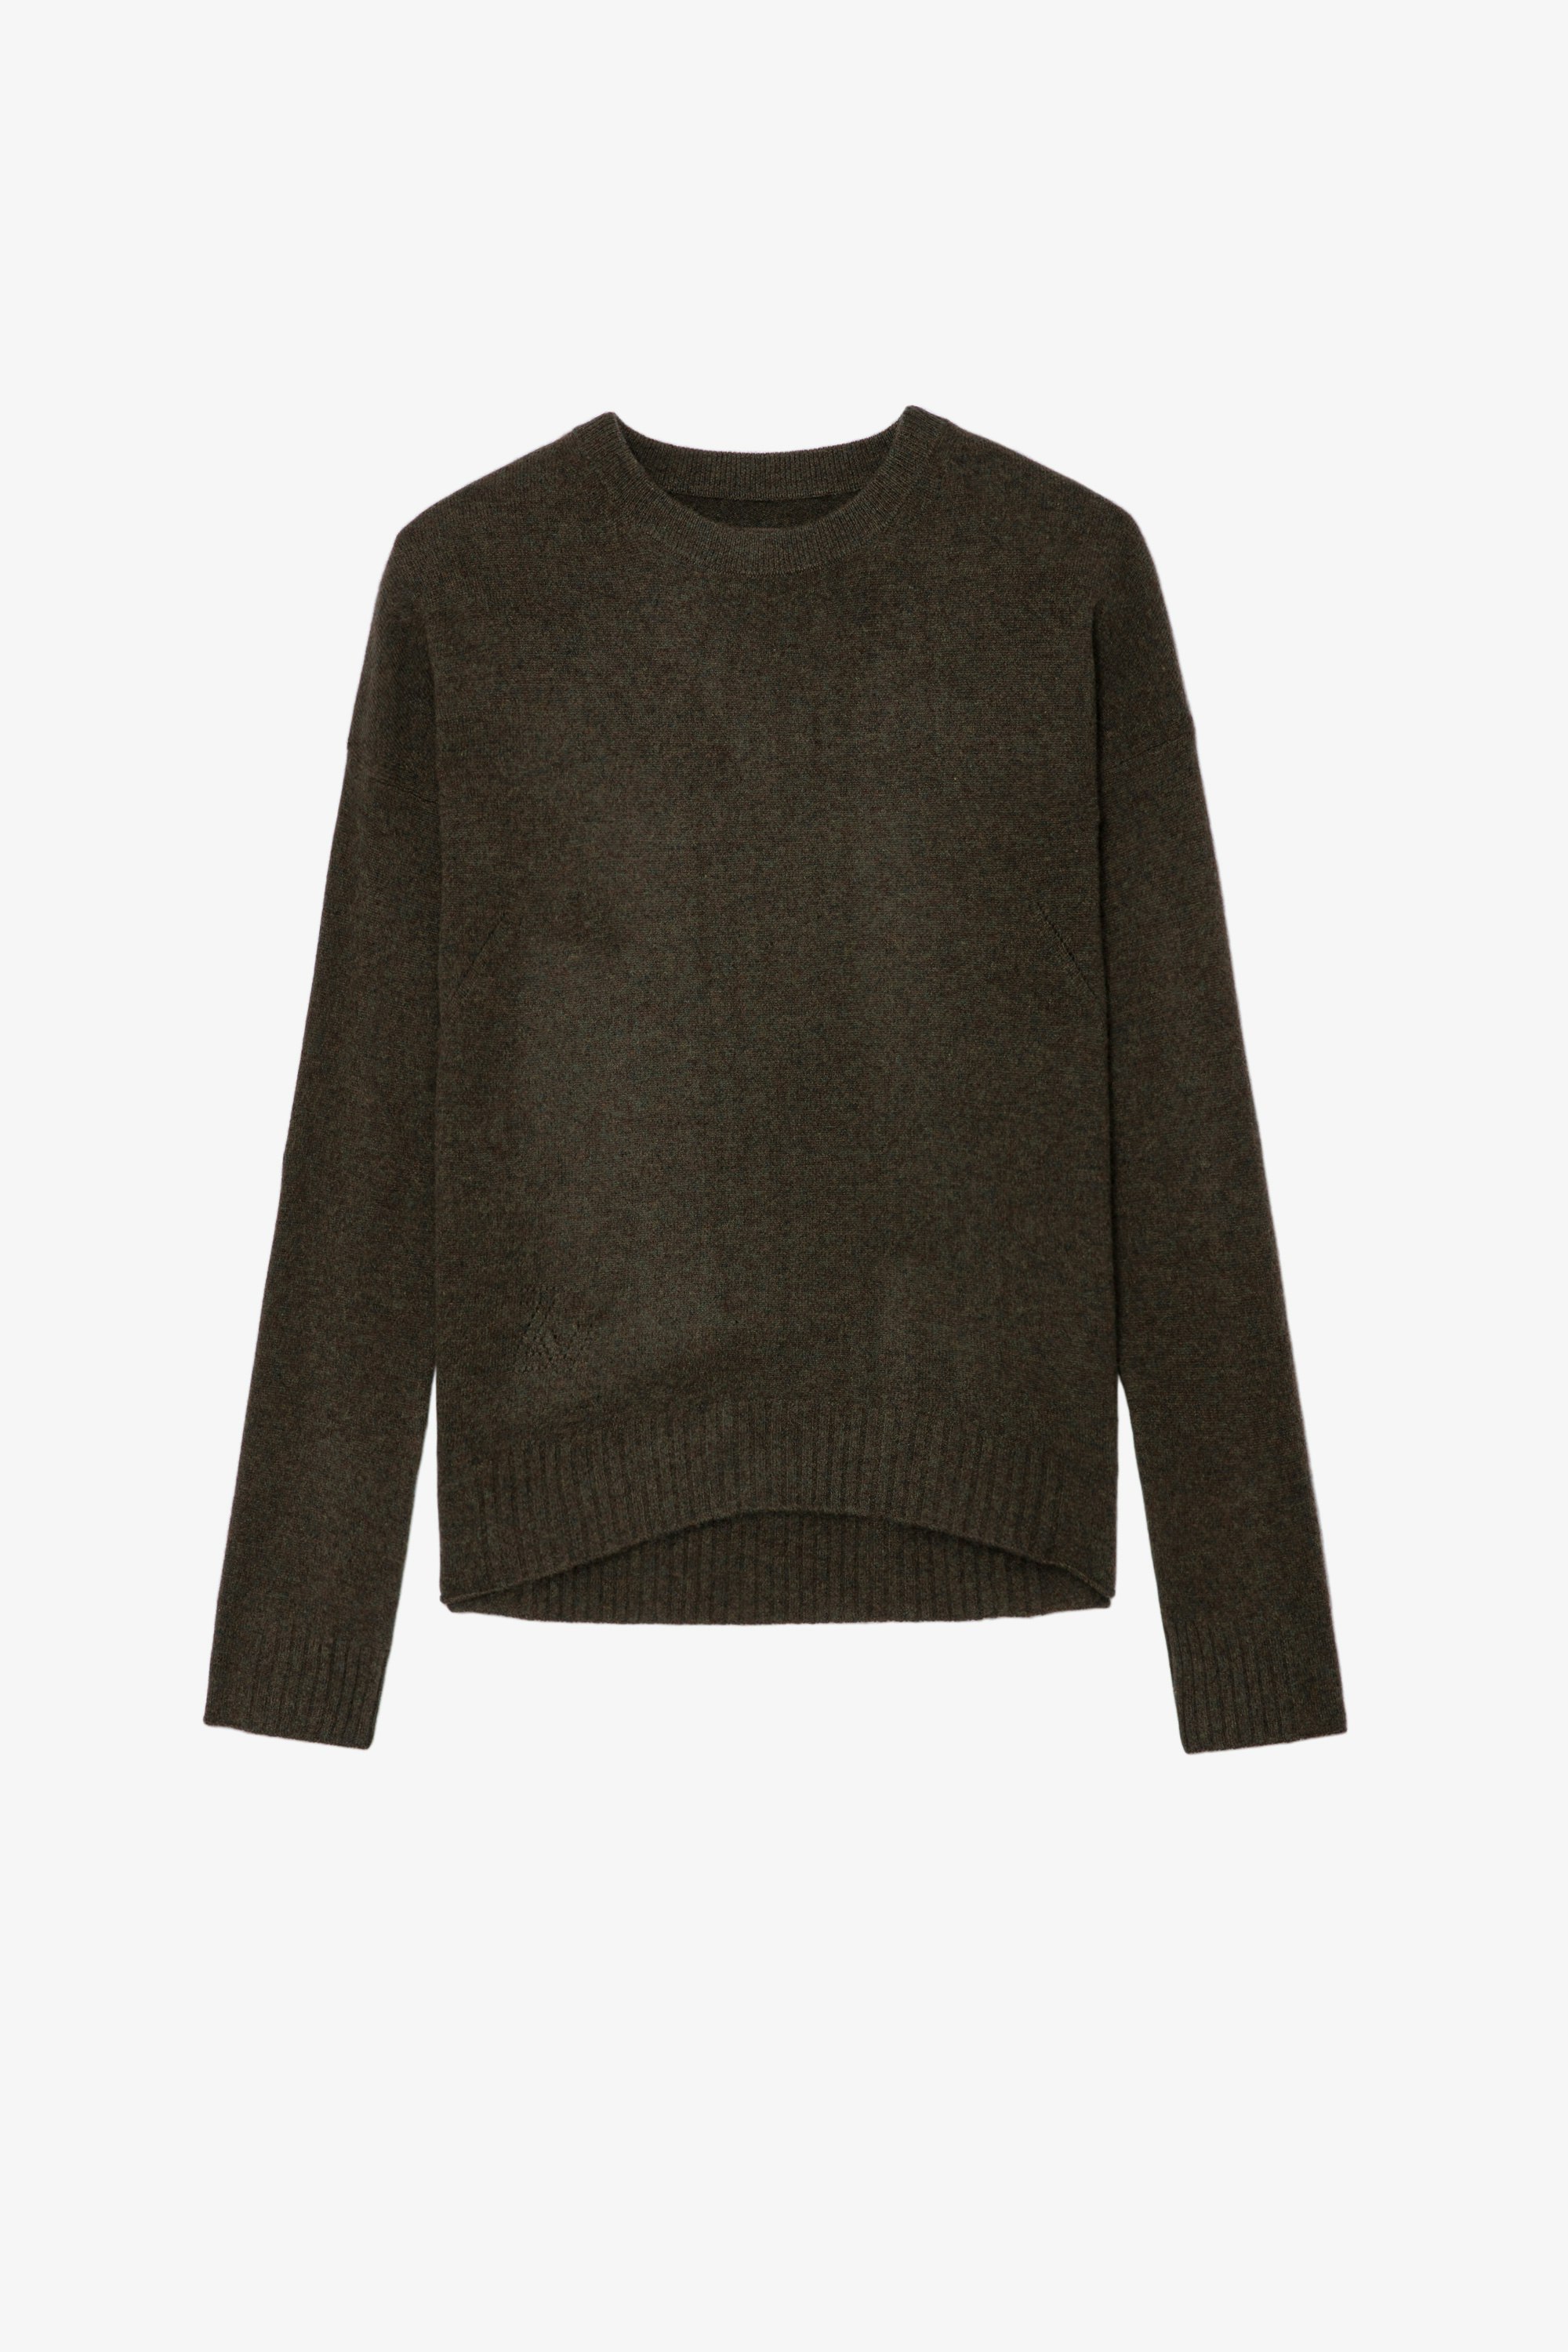 Cici Patch Cashmere Sweater Bronze feather cashmere round-neck jumper with star patches on the elbows